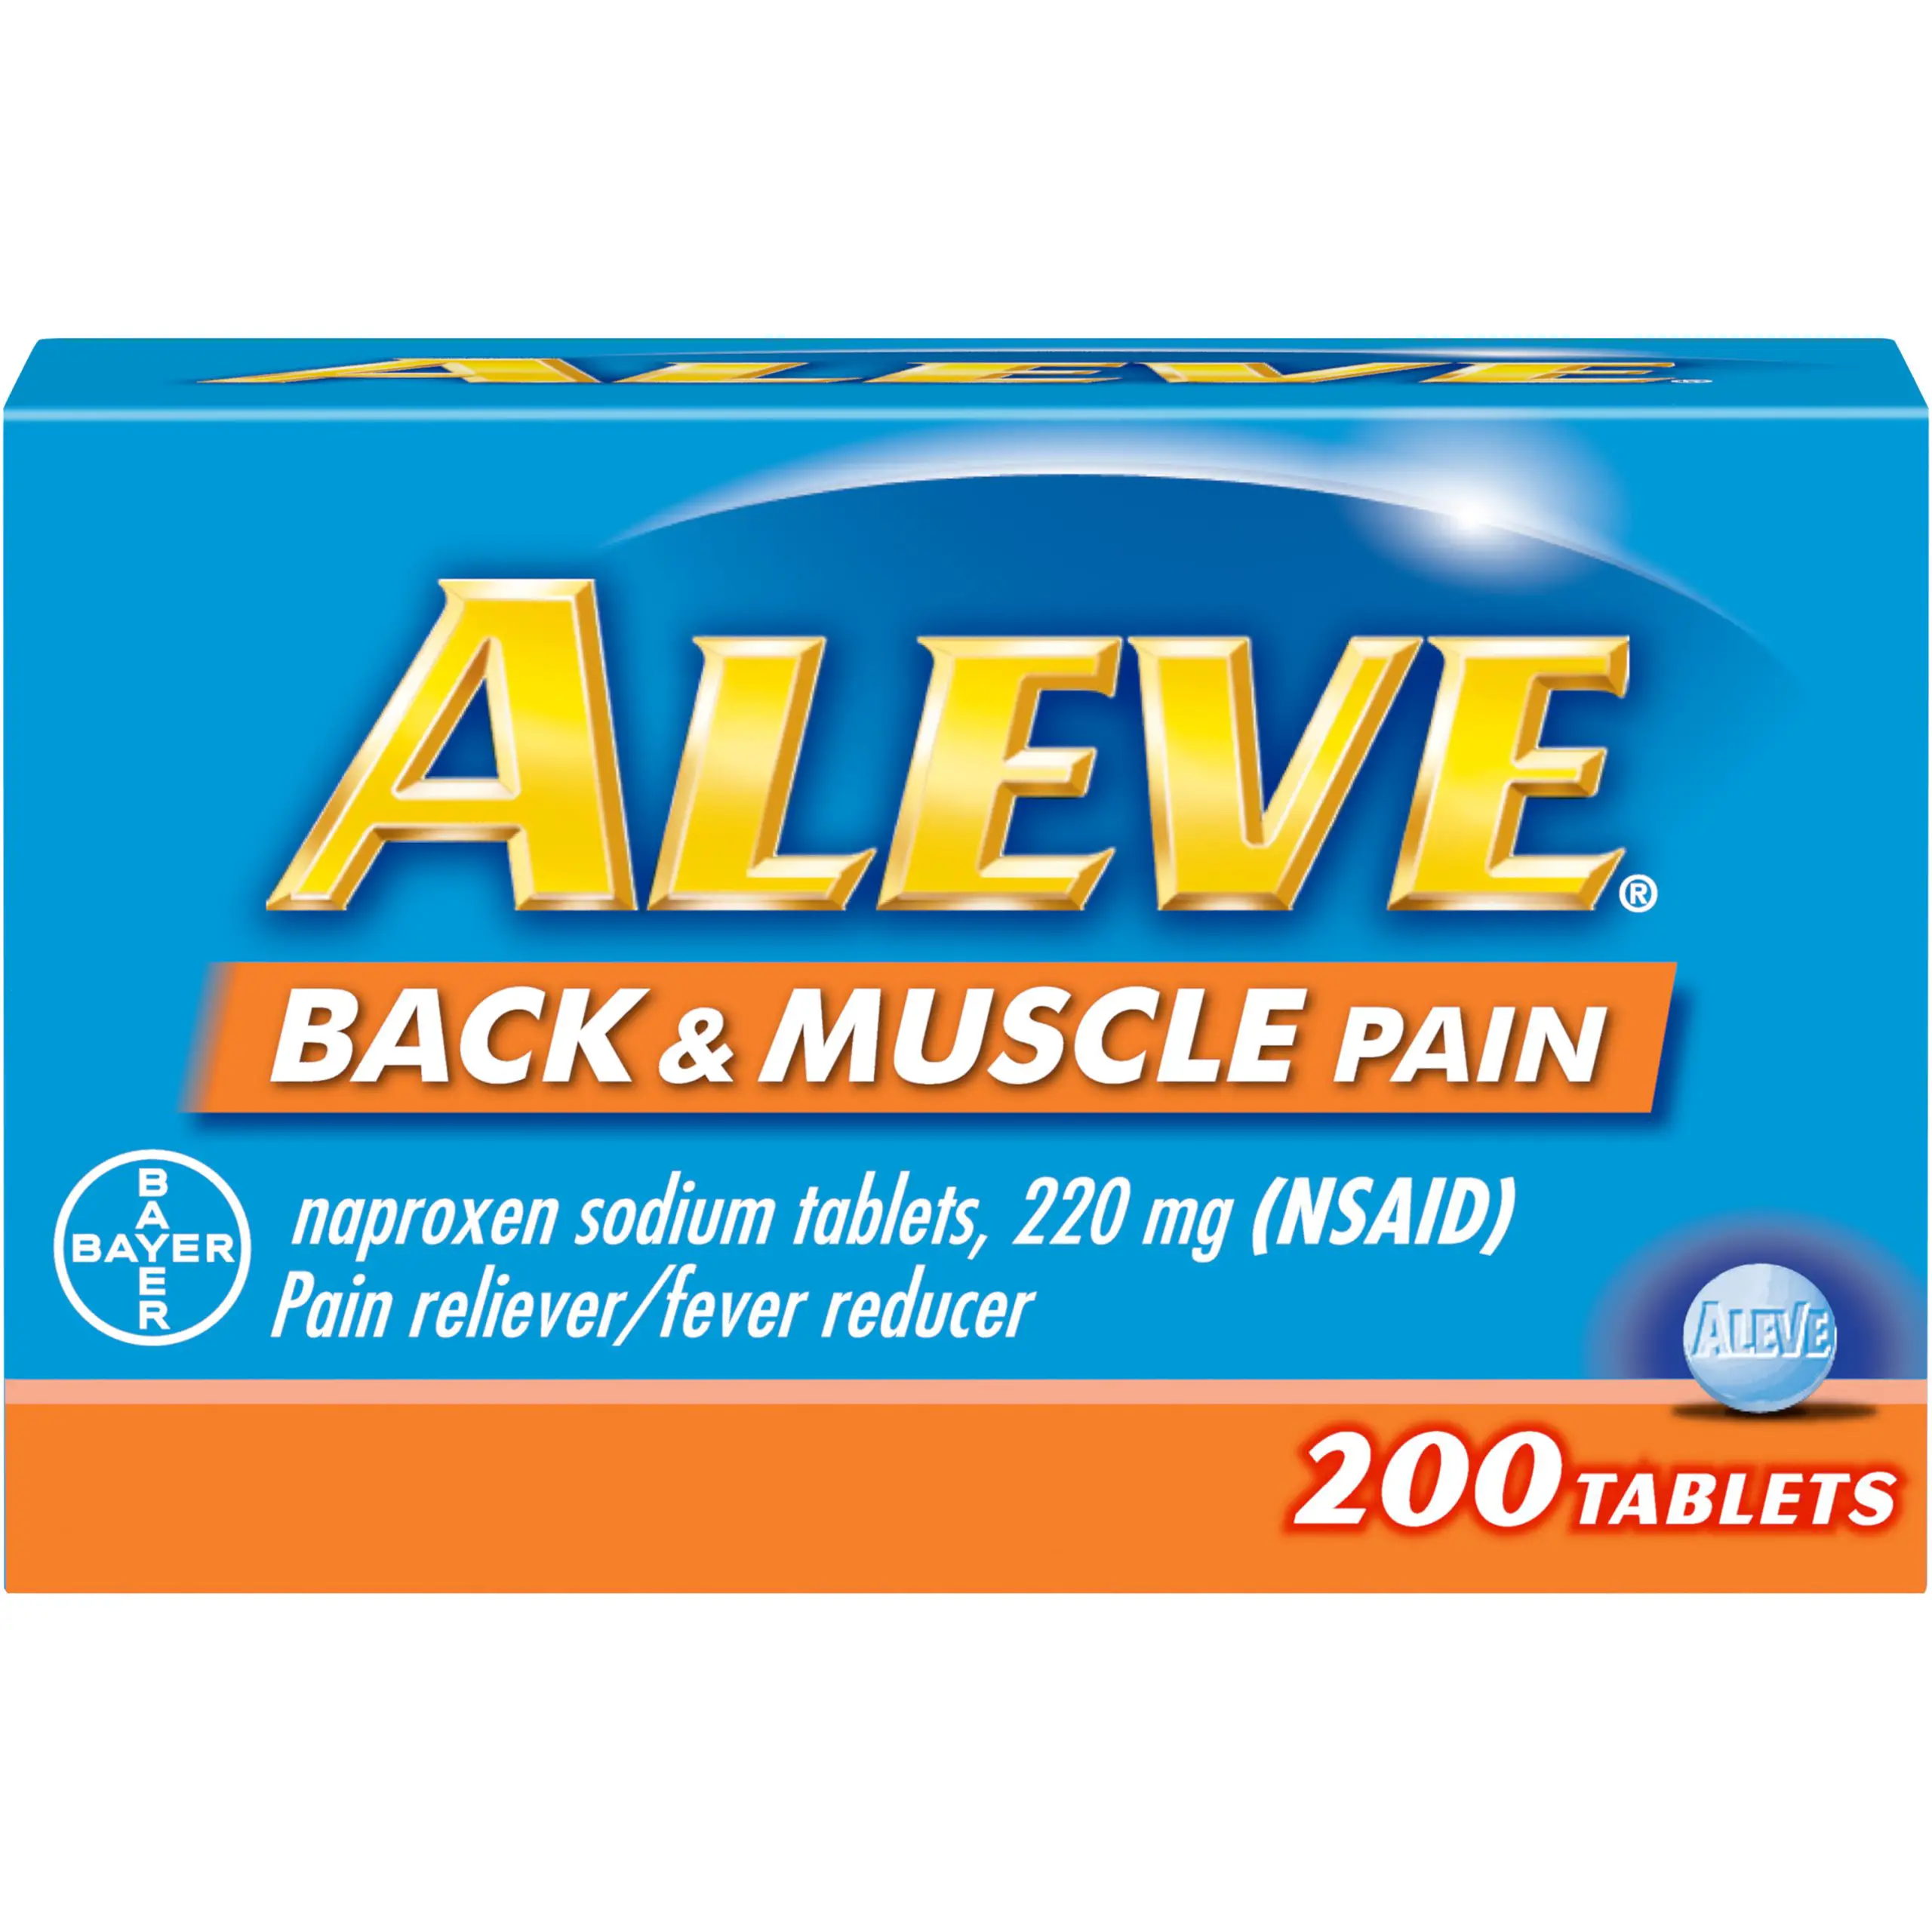 Aleve Back &  Muscle Pain Reliever/Fever Reducer Naproxen Sodium Tablets ...